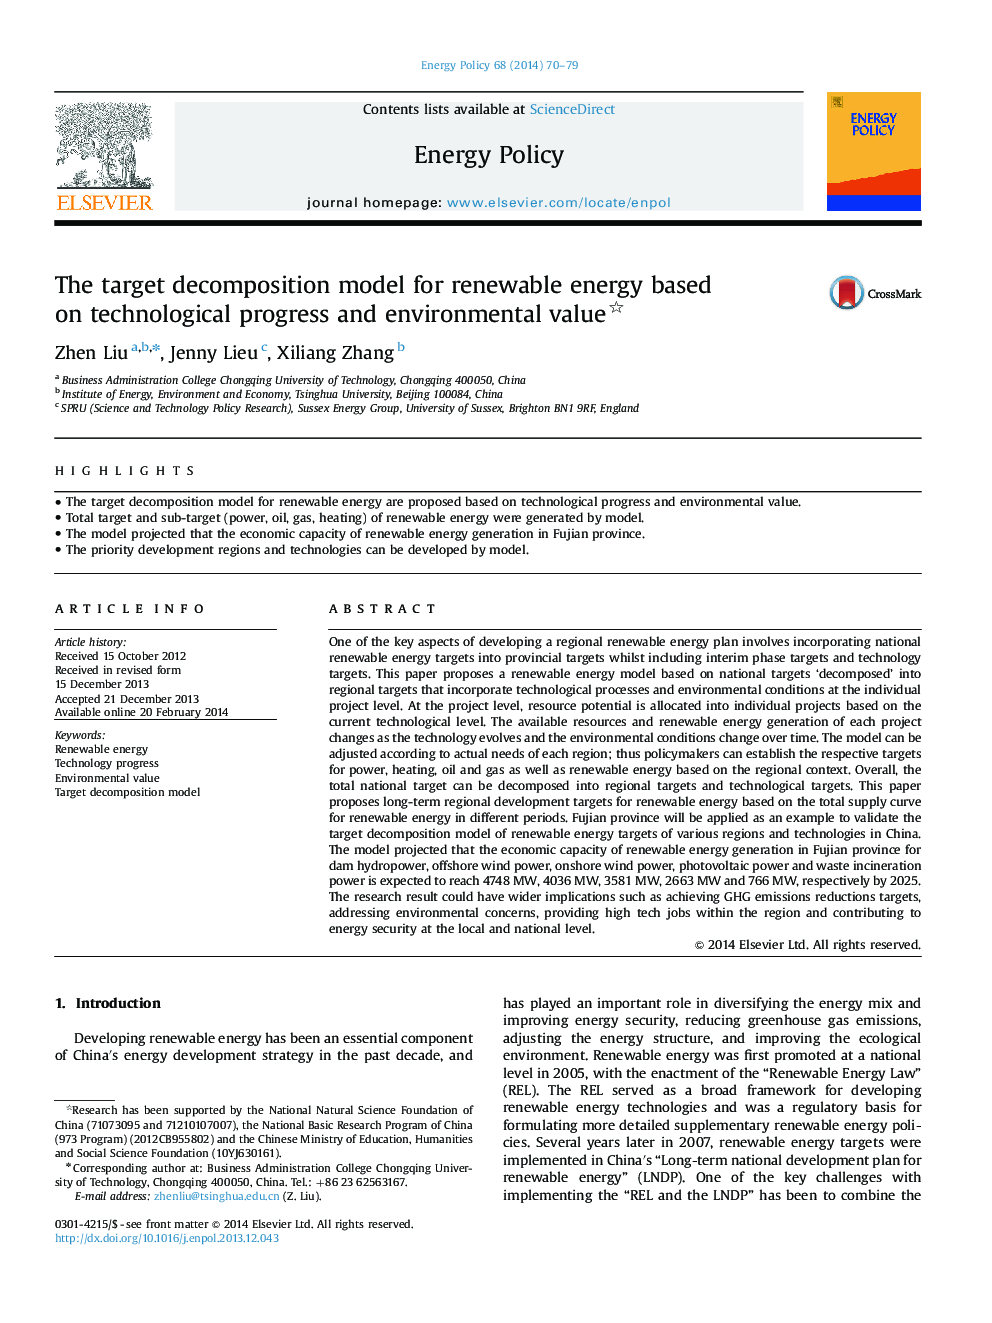 The target decomposition model for renewable energy based on technological progress and environmental value